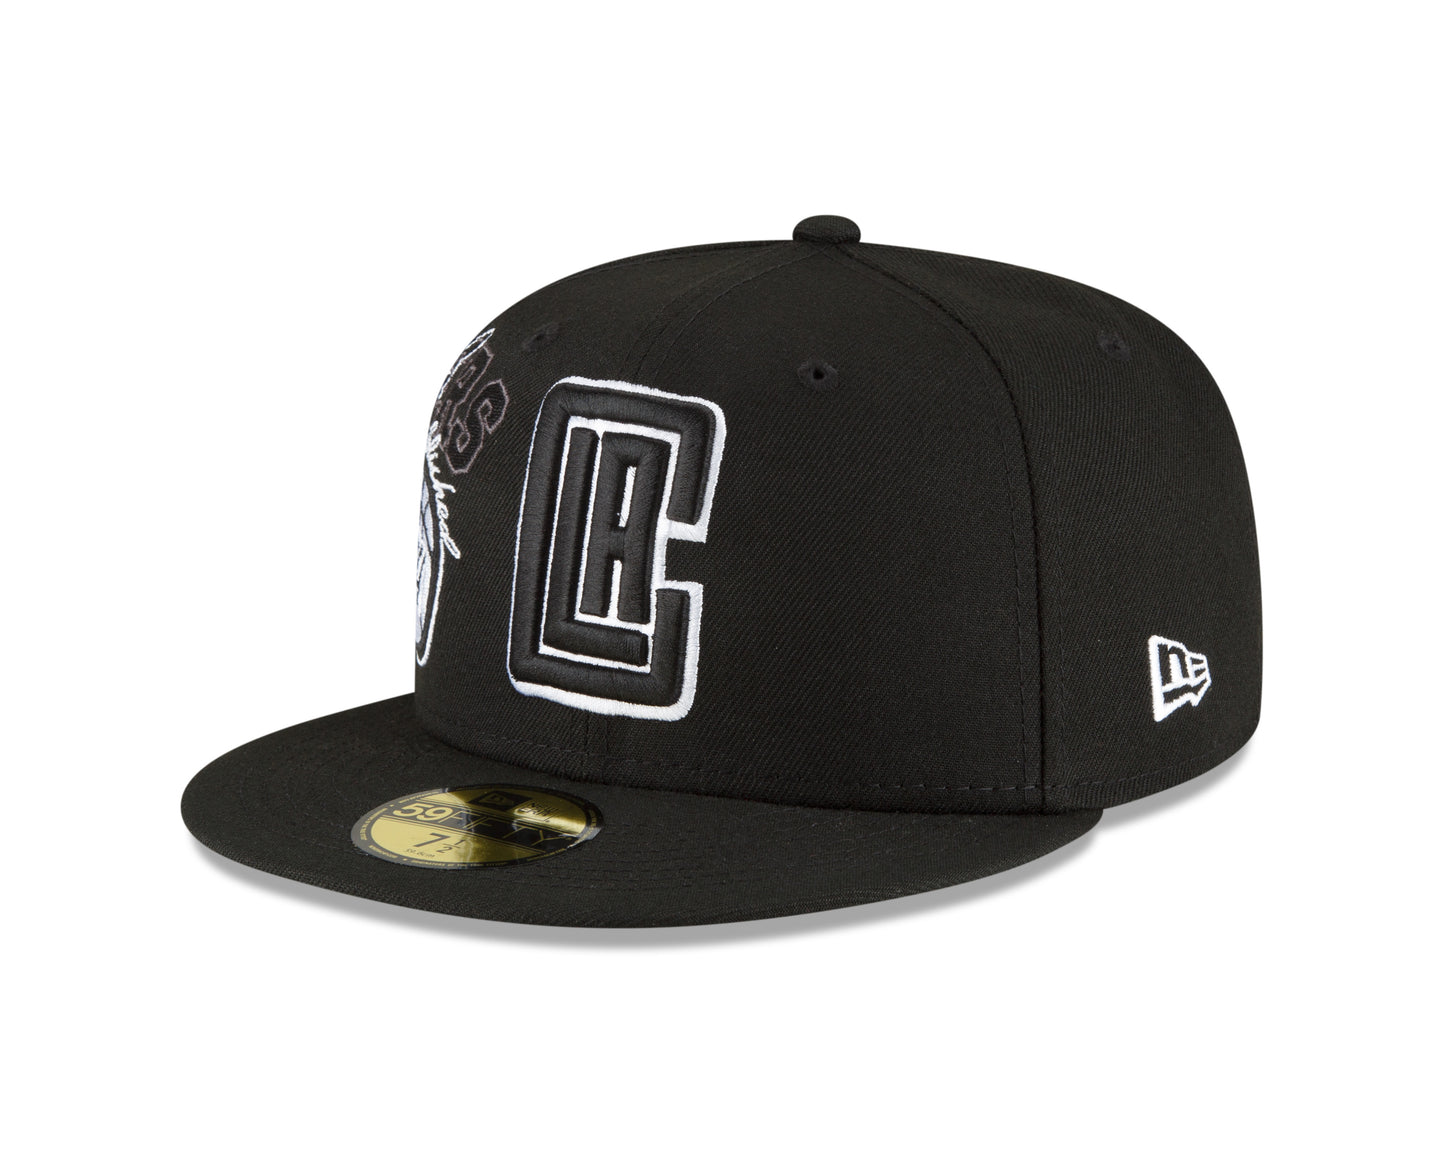 Los Angeles Clippers New Era Black and White Back Half 59fifty Fitted Hat